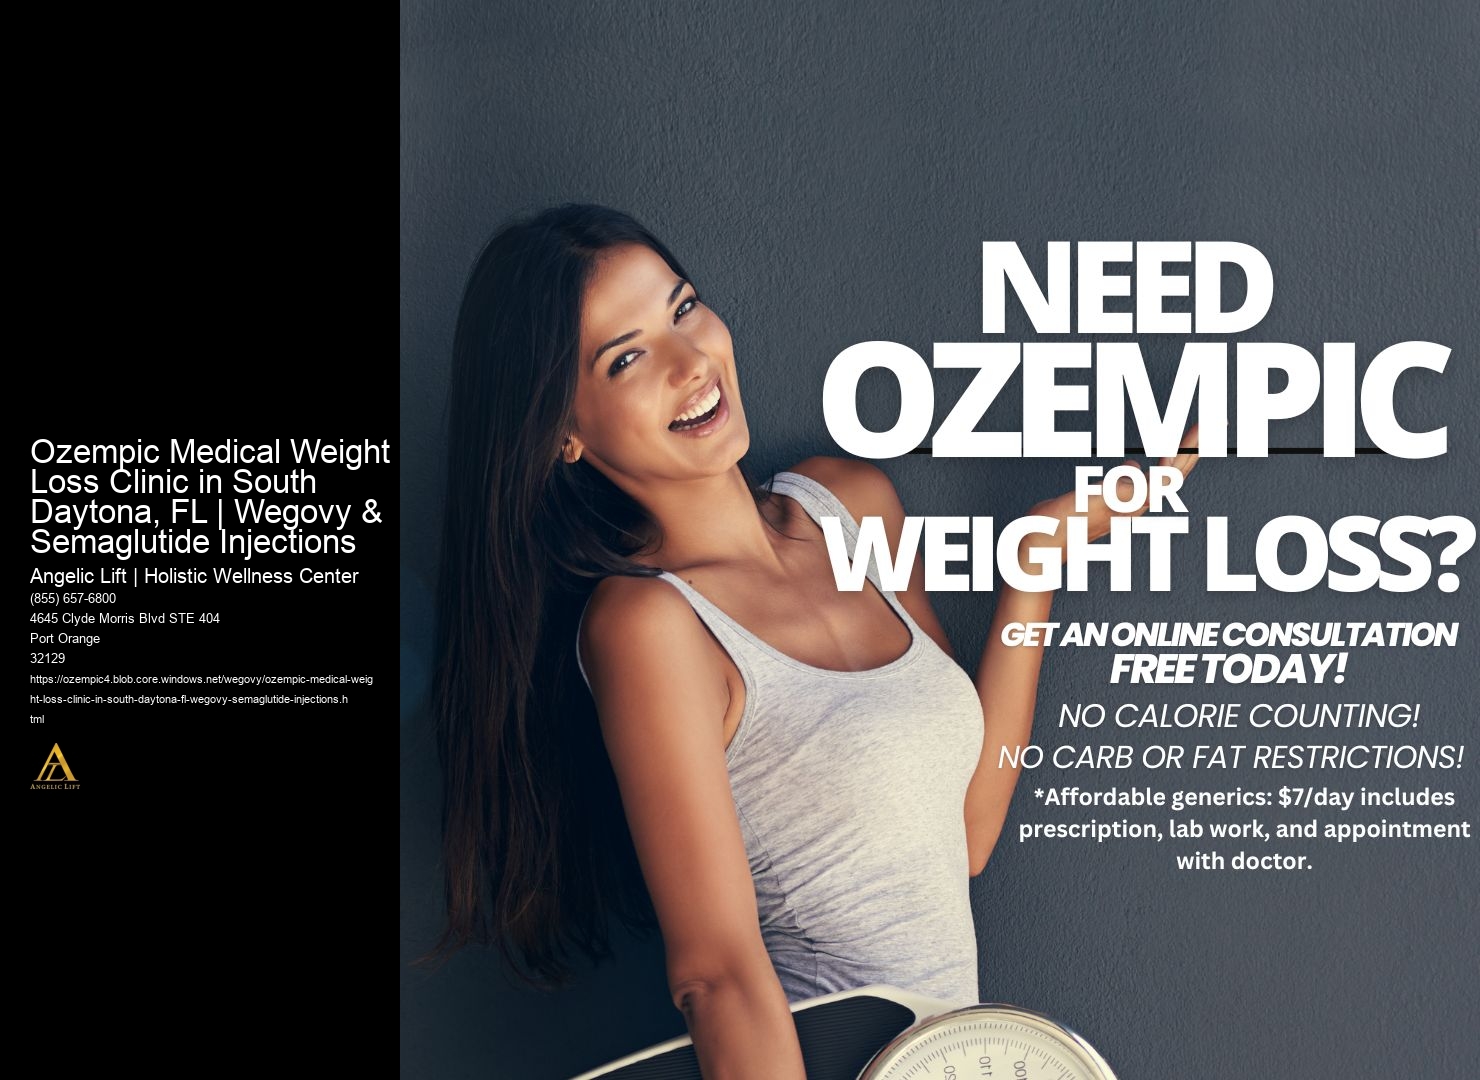 Ozempic Medical Weight Loss Clinic in South Daytona, FL | Wegovy & Semaglutide Injections